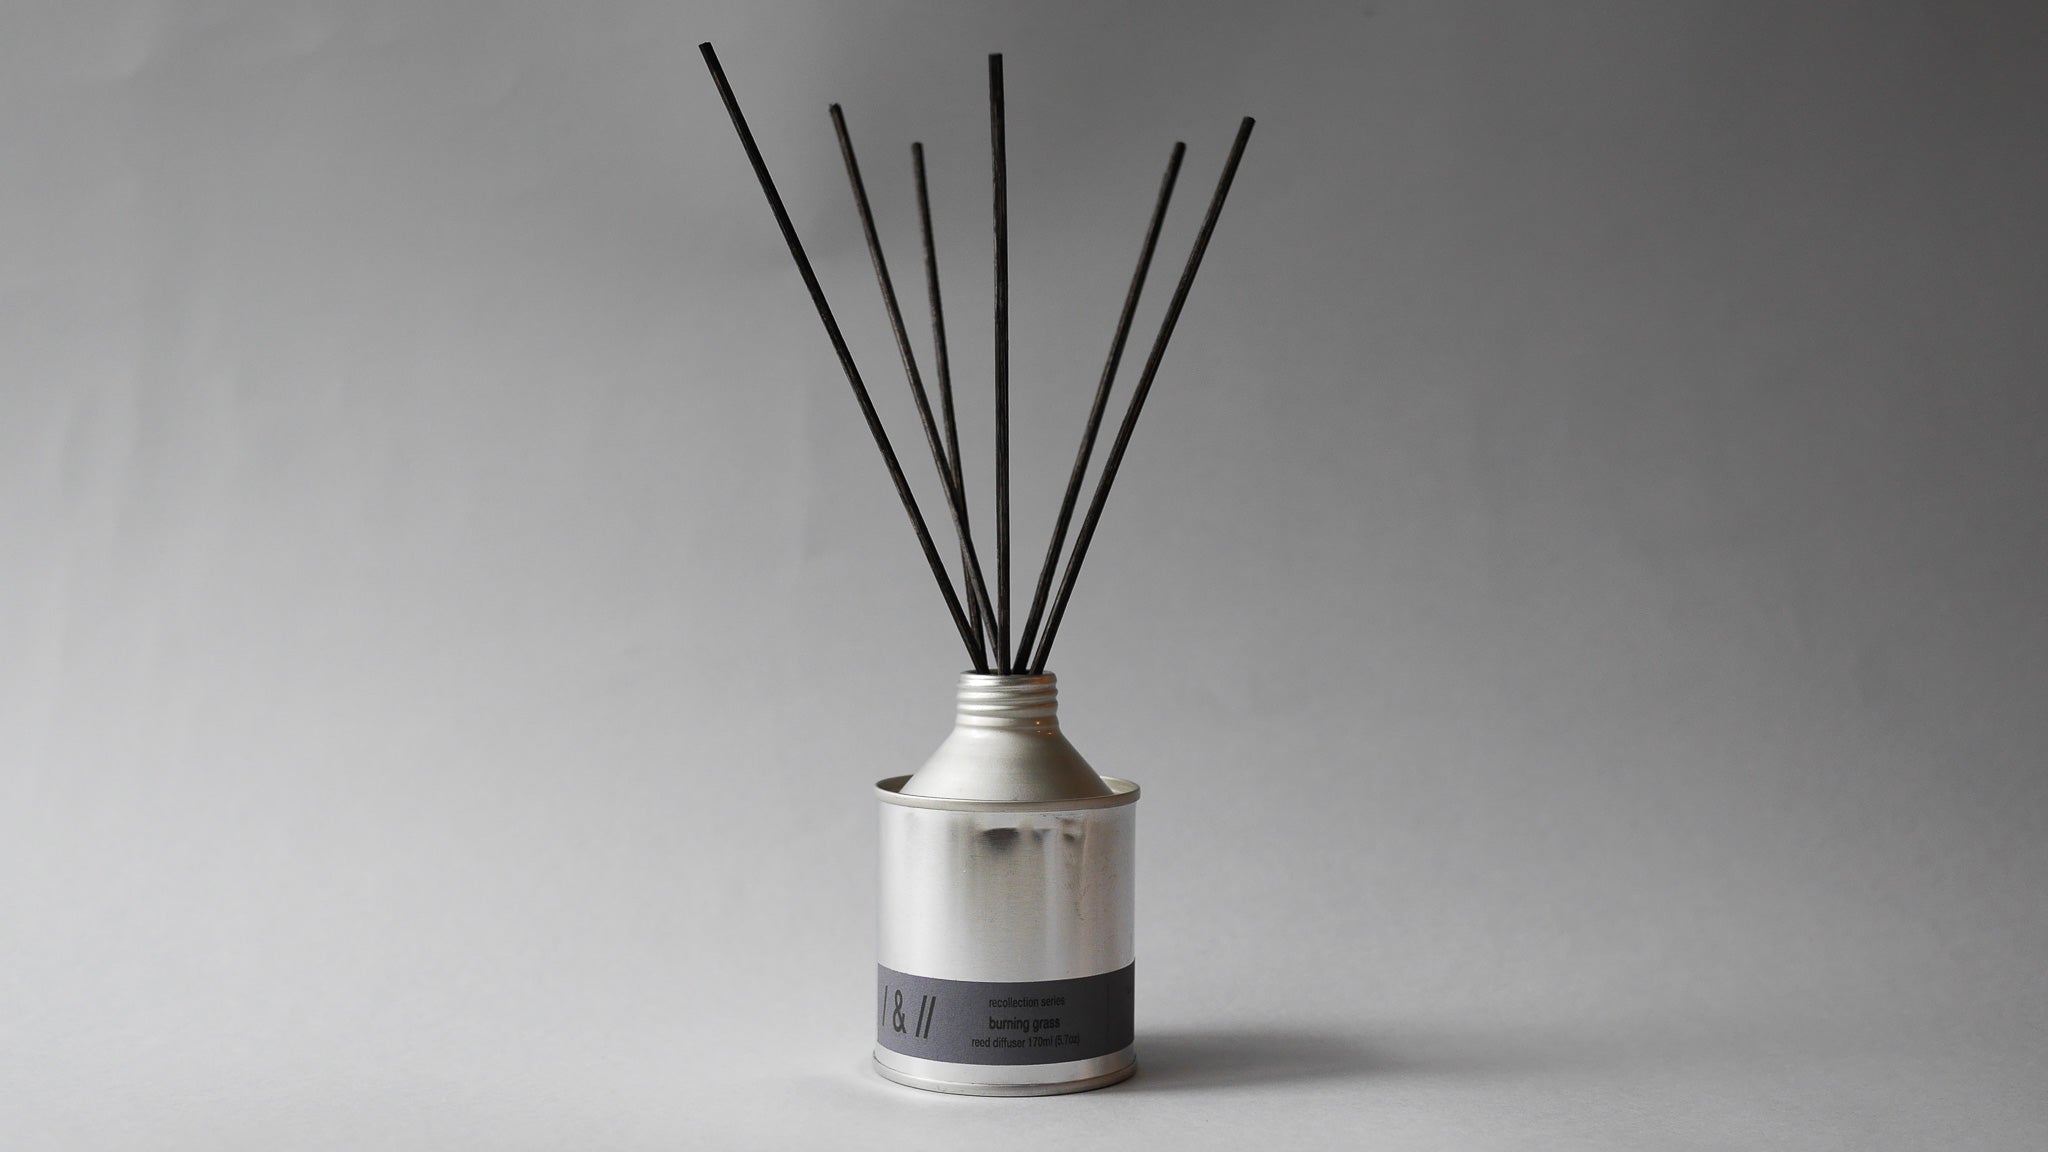 burning grass / reed diffuser 170ml // recollection series